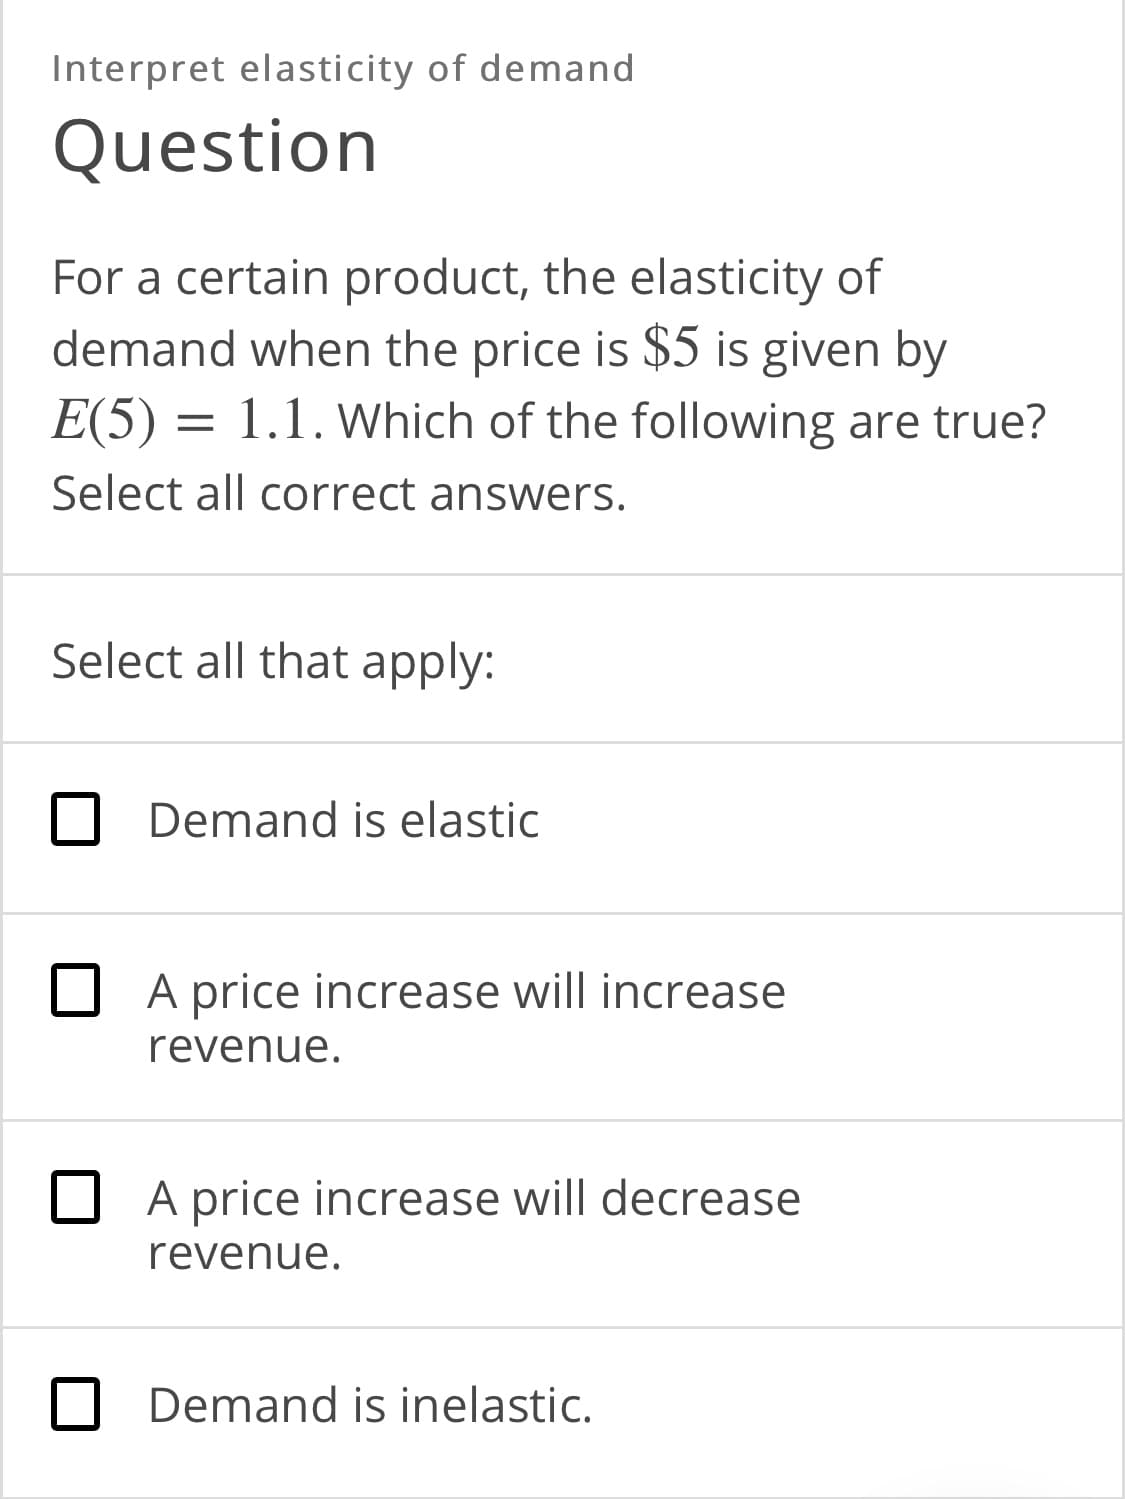 Interpret elasticity of demand
Question
For a certain product, the elasticity of
demand when the price is $5 is given by
E(5) = 1.1. Which of the following are true?
Select all correct answers.
Select all that apply:
Demand is elastic
O A price increase will increase
revenue.
O A price increase will decrease
revenue.
Demand is inelastic.
